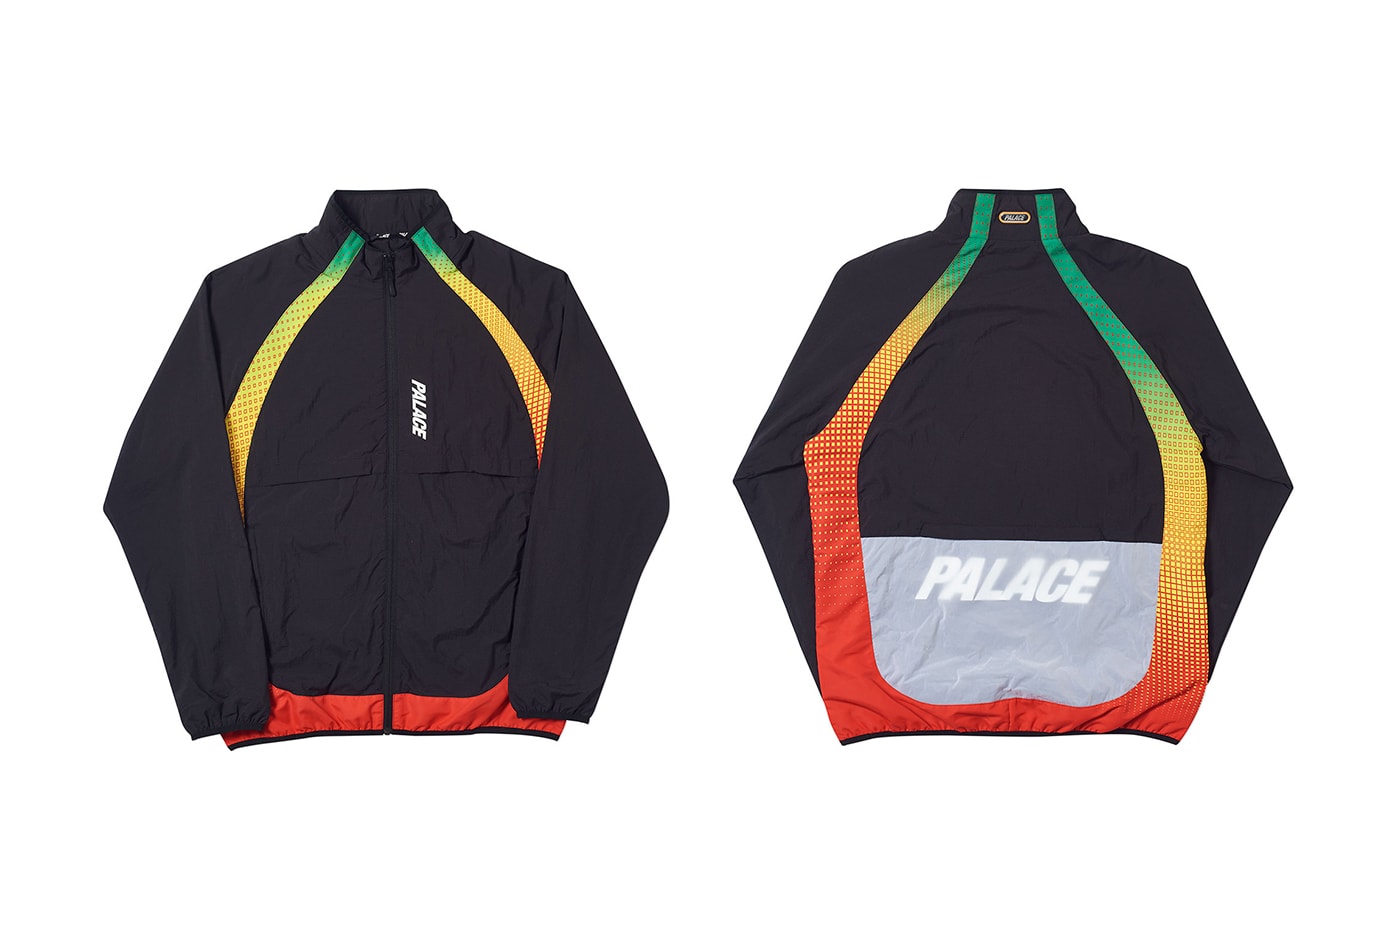 Palace Summer 2019 Collection Full Look Pieces T-Shirt Jacket Logo Trousers Pants Accessories